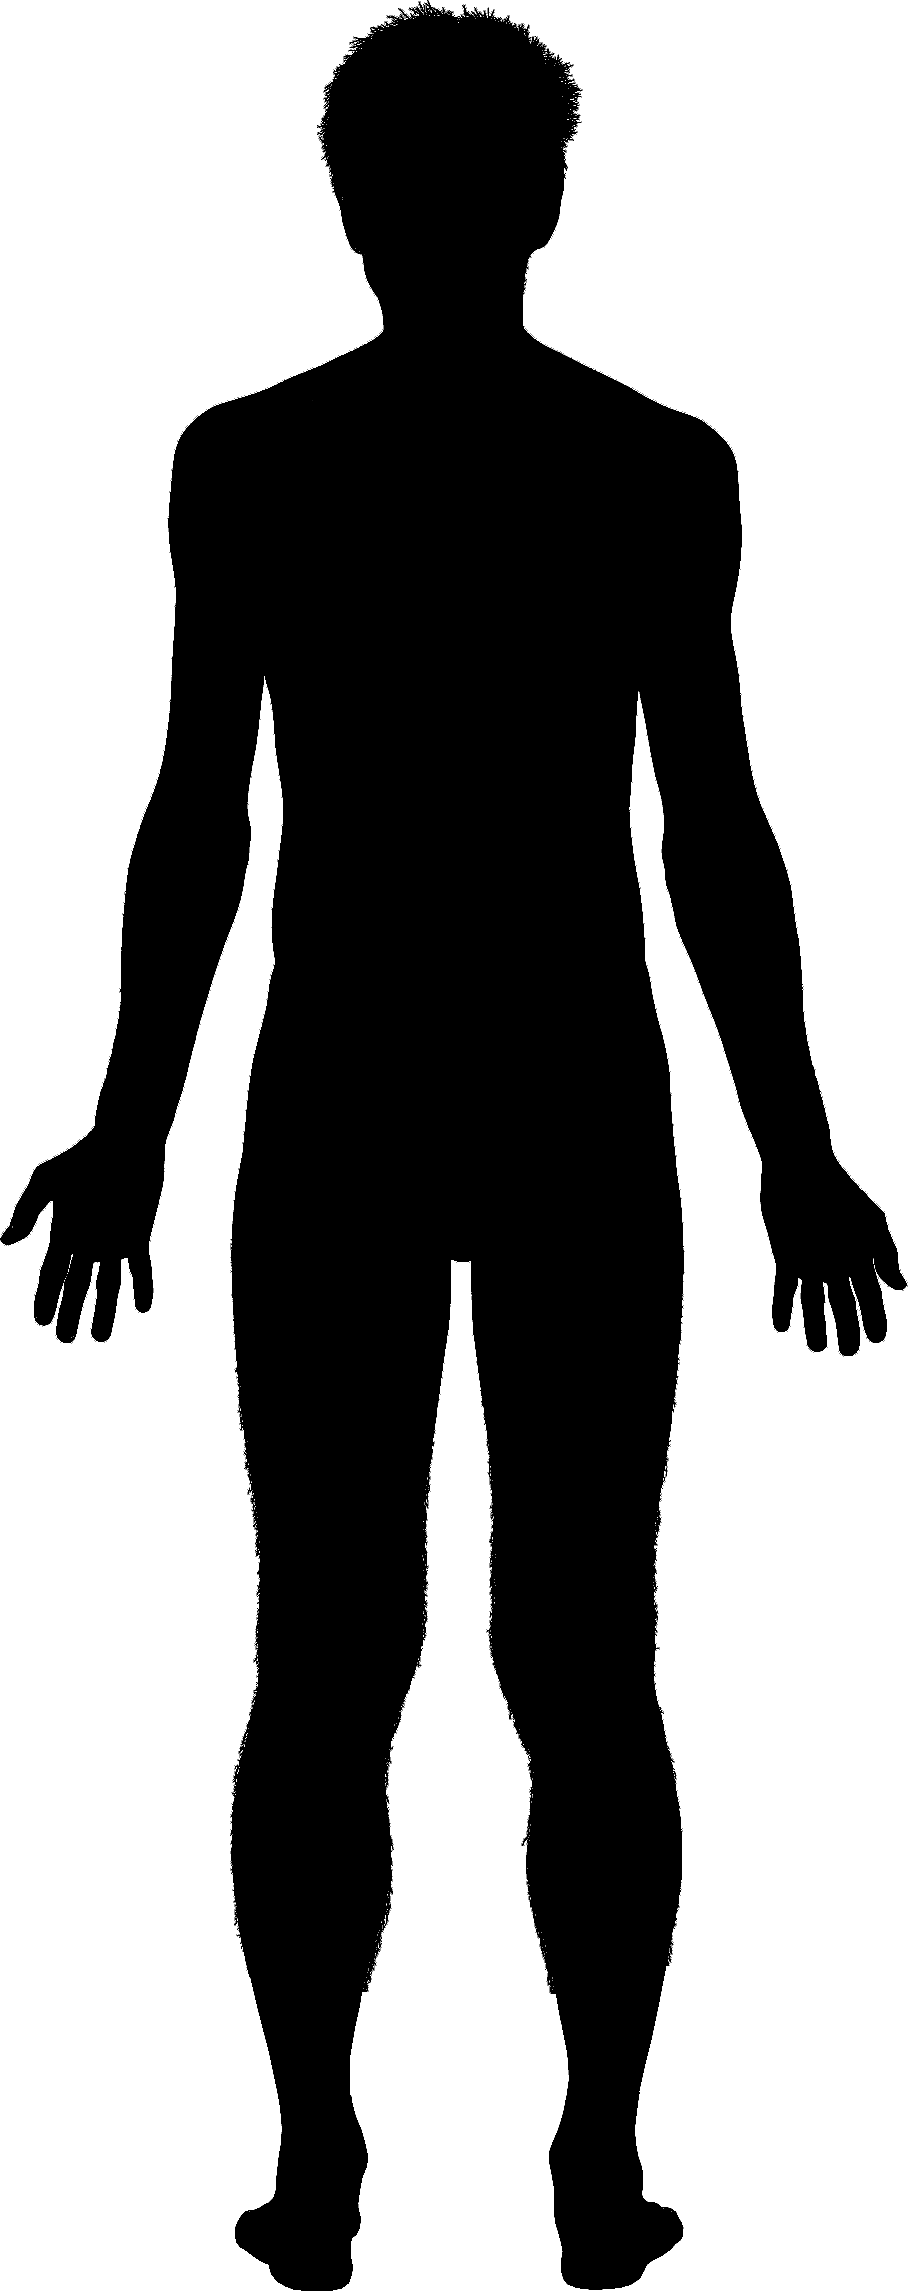 Outline Of A Man - ClipArt Best